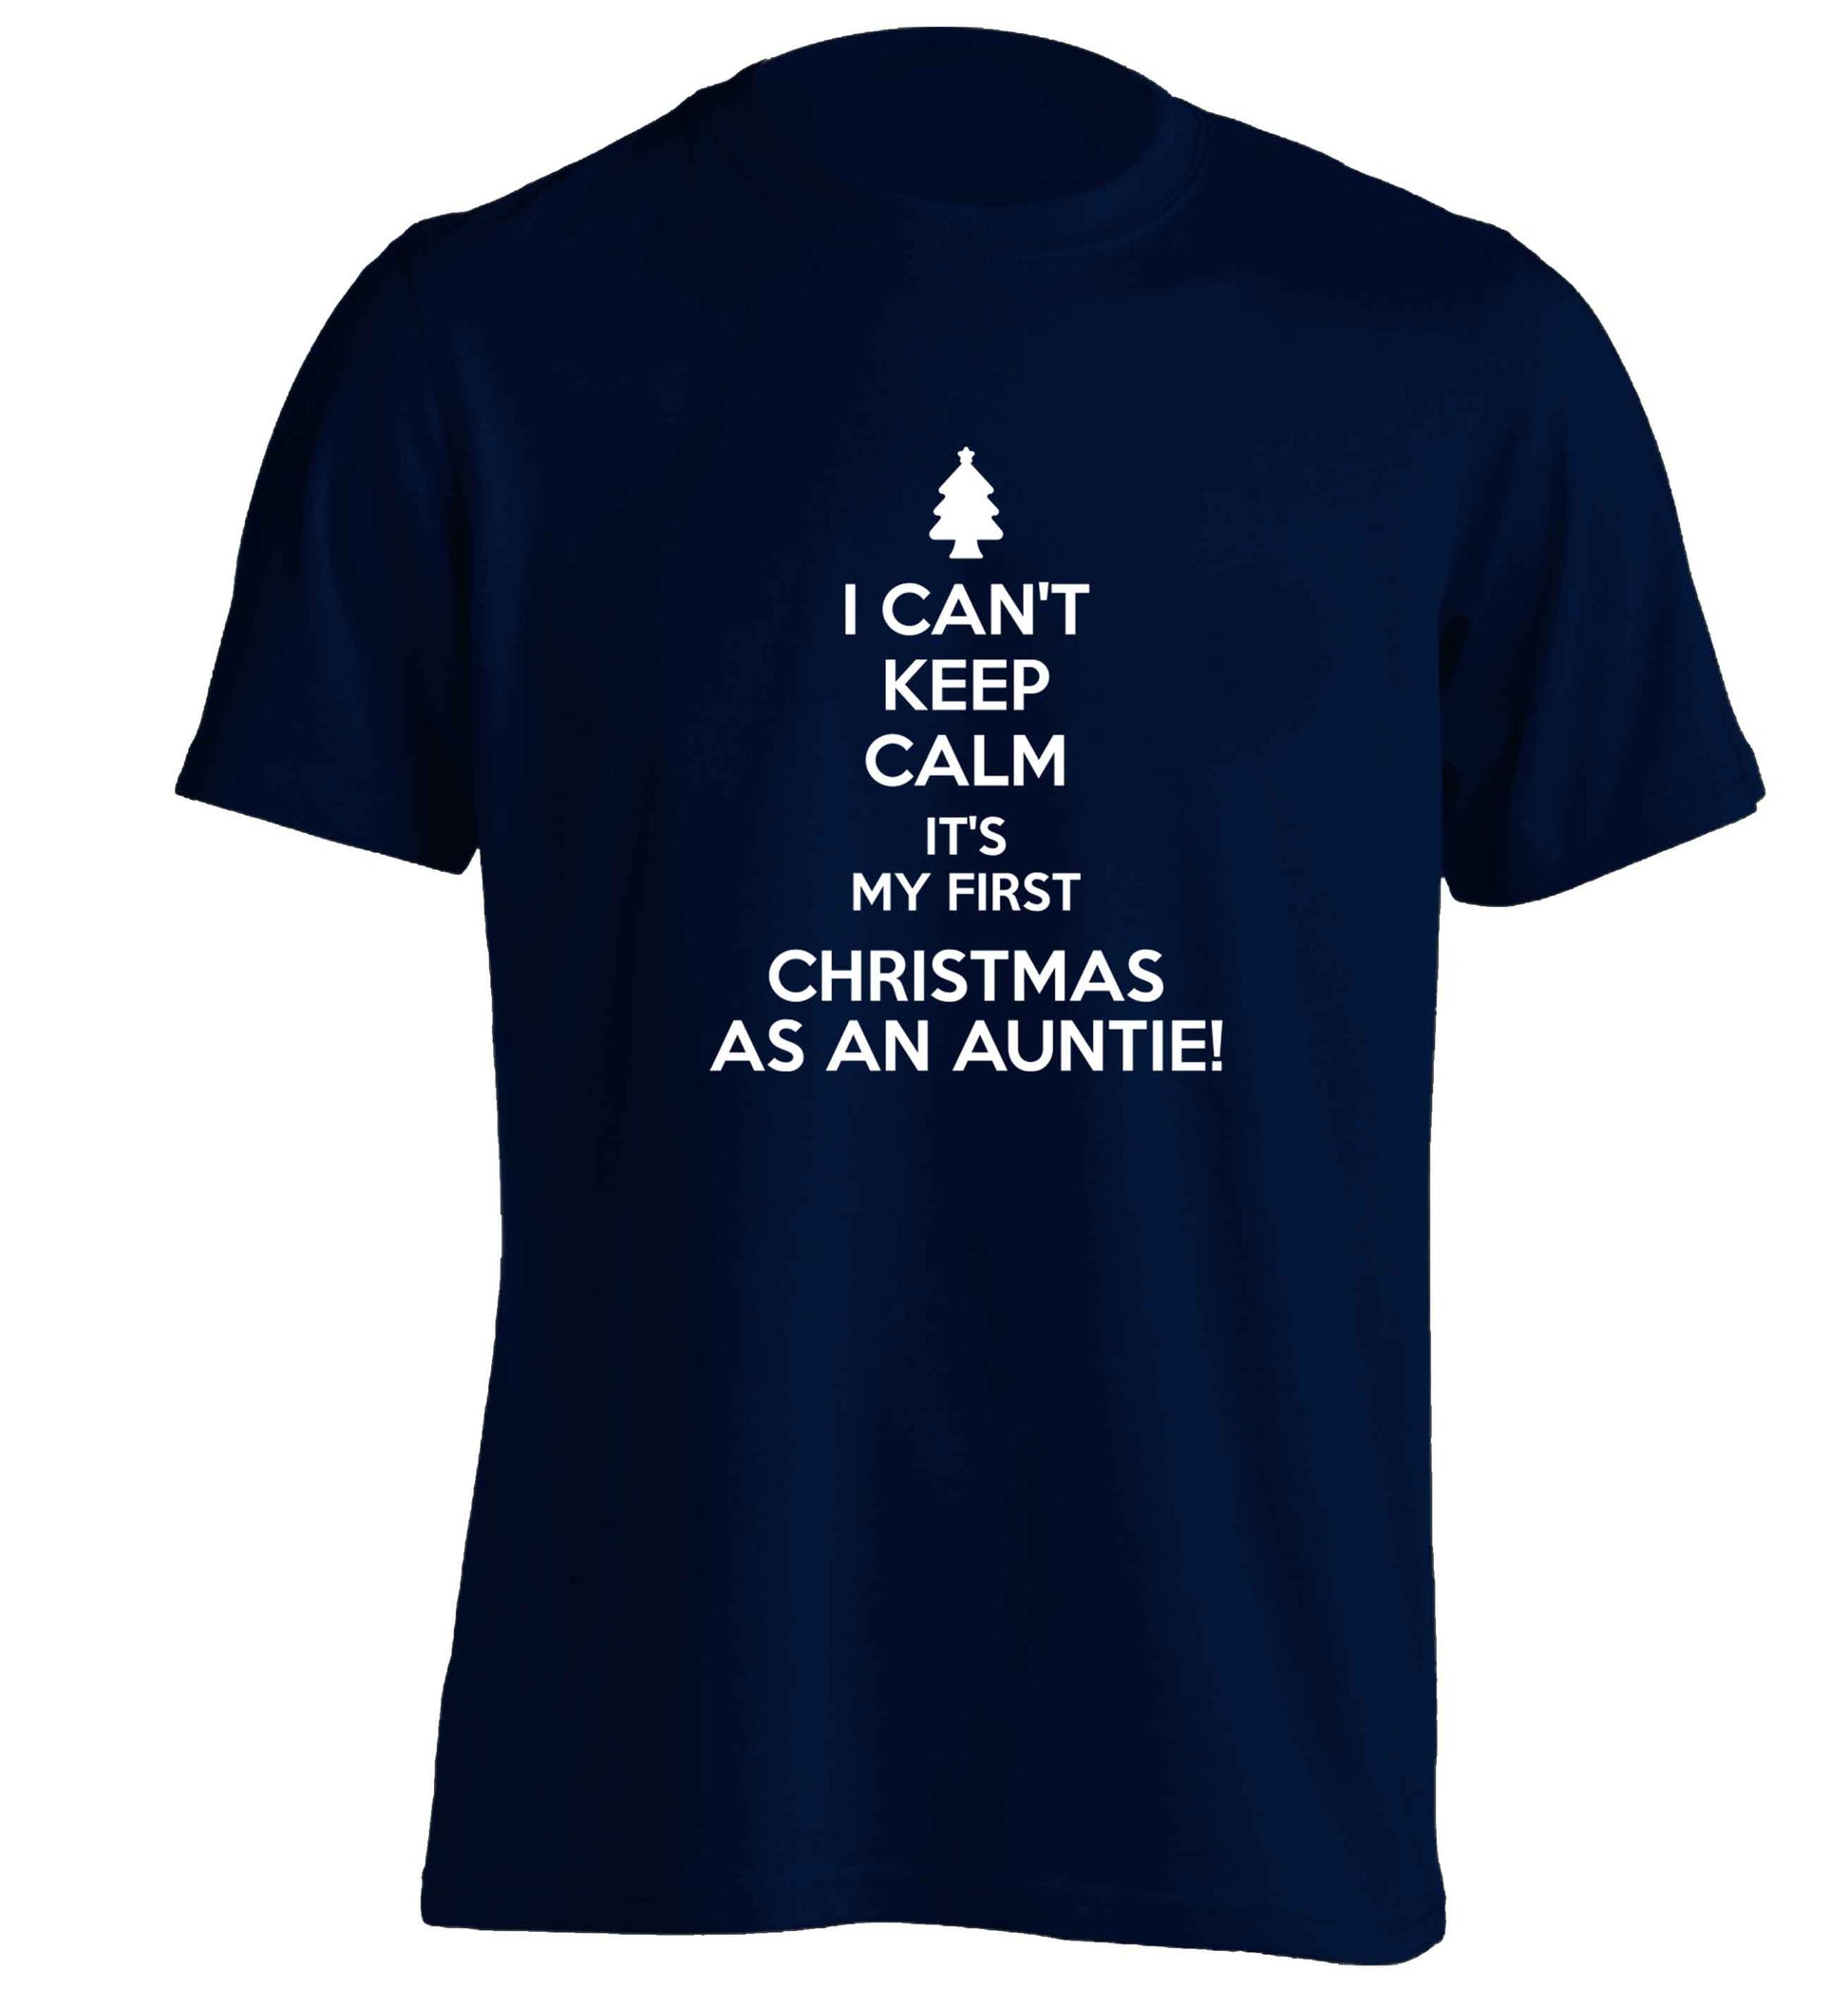 I can't keep calm it's my first Christmas as an auntie! adults unisex navy Tshirt 2XL